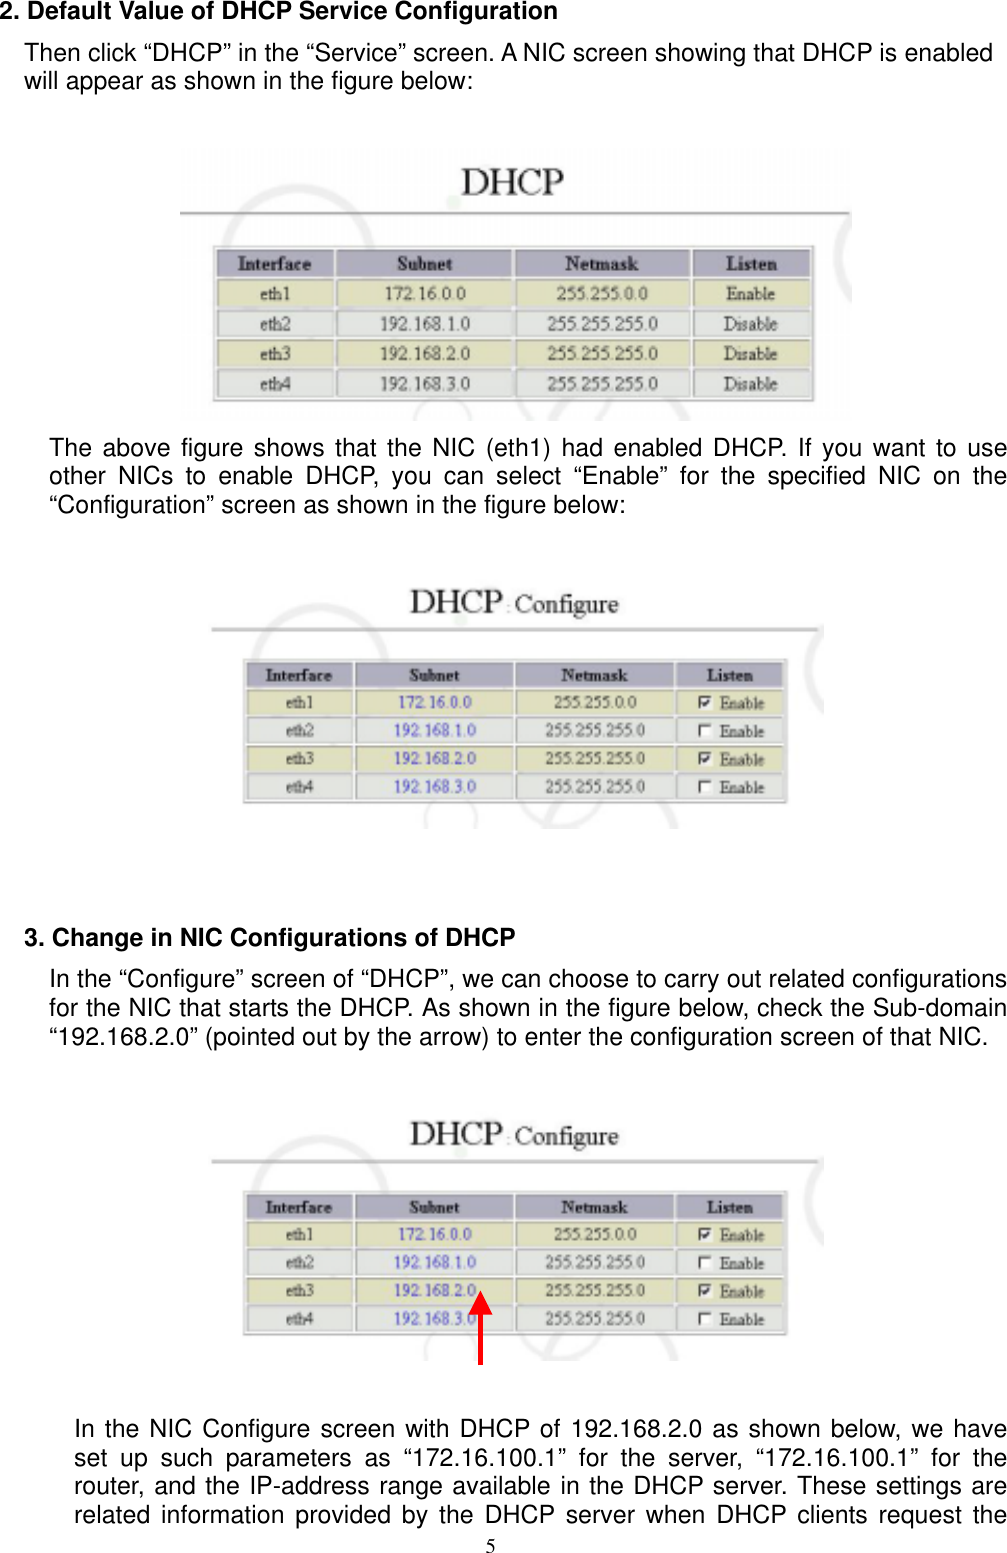  52. Default Value of DHCP Service Configuration Then click “DHCP” in the “Service” screen. A NIC screen showing that DHCP is enabled will appear as shown in the figure below:   The above figure shows that the NIC (eth1) had enabled DHCP. If you want to use other NICs to enable DHCP, you can select “Enable” for the specified NIC on the “Configuration” screen as shown in the figure below:       3. Change in NIC Configurations of DHCP In the “Configure” screen of “DHCP”, we can choose to carry out related configurations for the NIC that starts the DHCP. As shown in the figure below, check the Sub-domain “192.168.2.0” (pointed out by the arrow) to enter the configuration screen of that NIC.                        In the NIC Configure screen with DHCP of 192.168.2.0 as shown below, we have set up such parameters as “172.16.100.1” for the server, “172.16.100.1” for the router, and the IP-address range available in the DHCP server. These settings are related information provided by the DHCP server when DHCP clients request the 